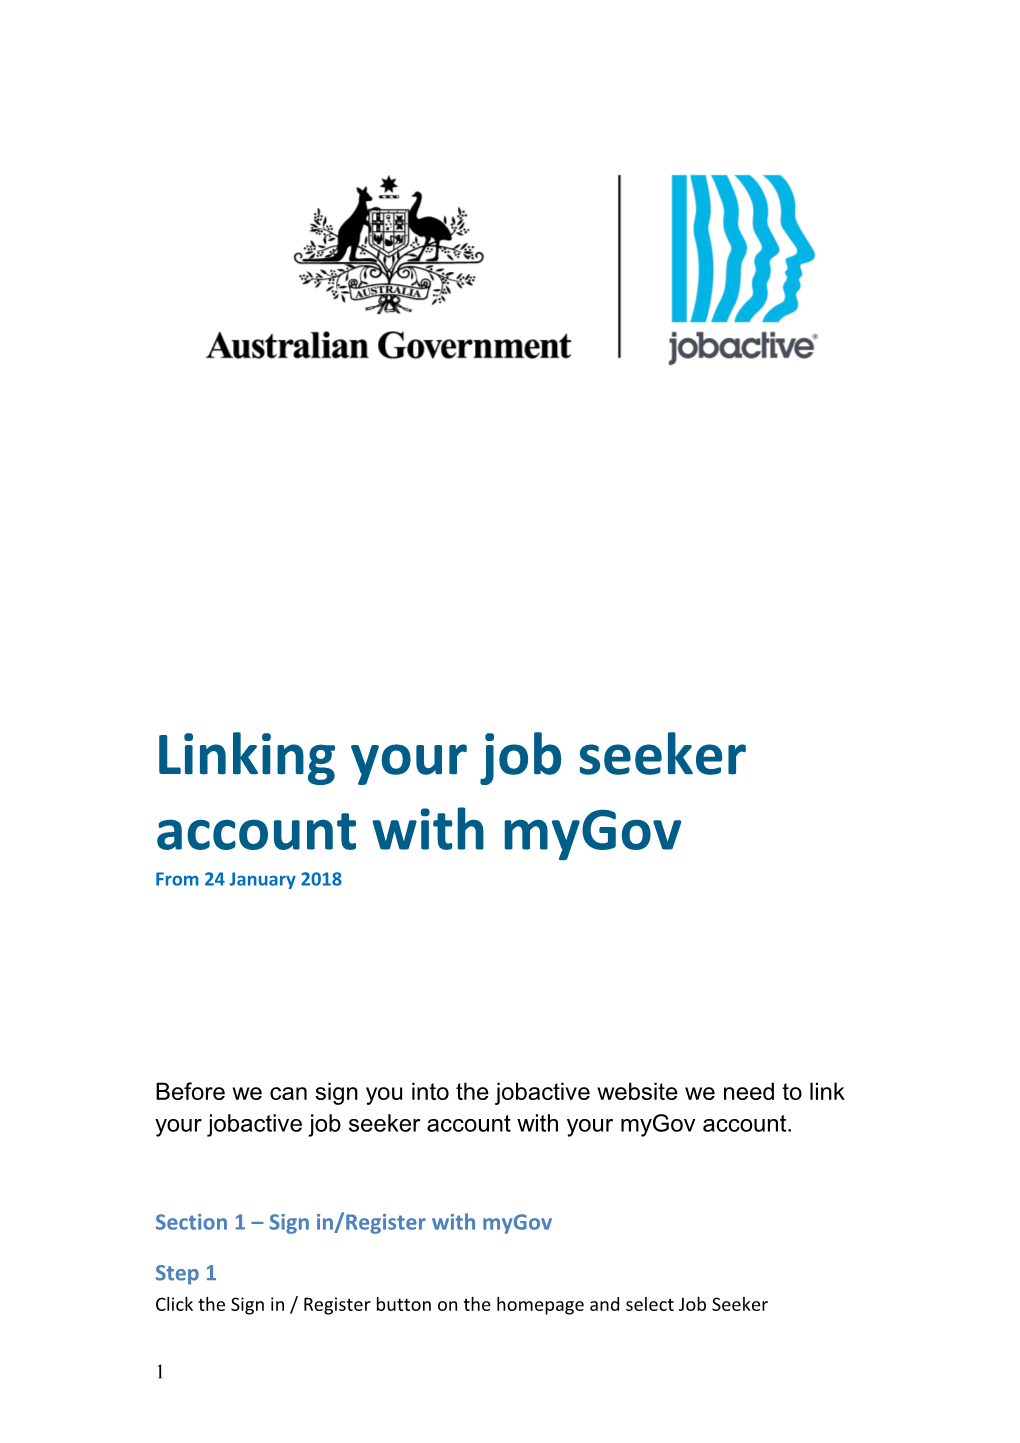 Linking Your Job Seeker Account with Mygov